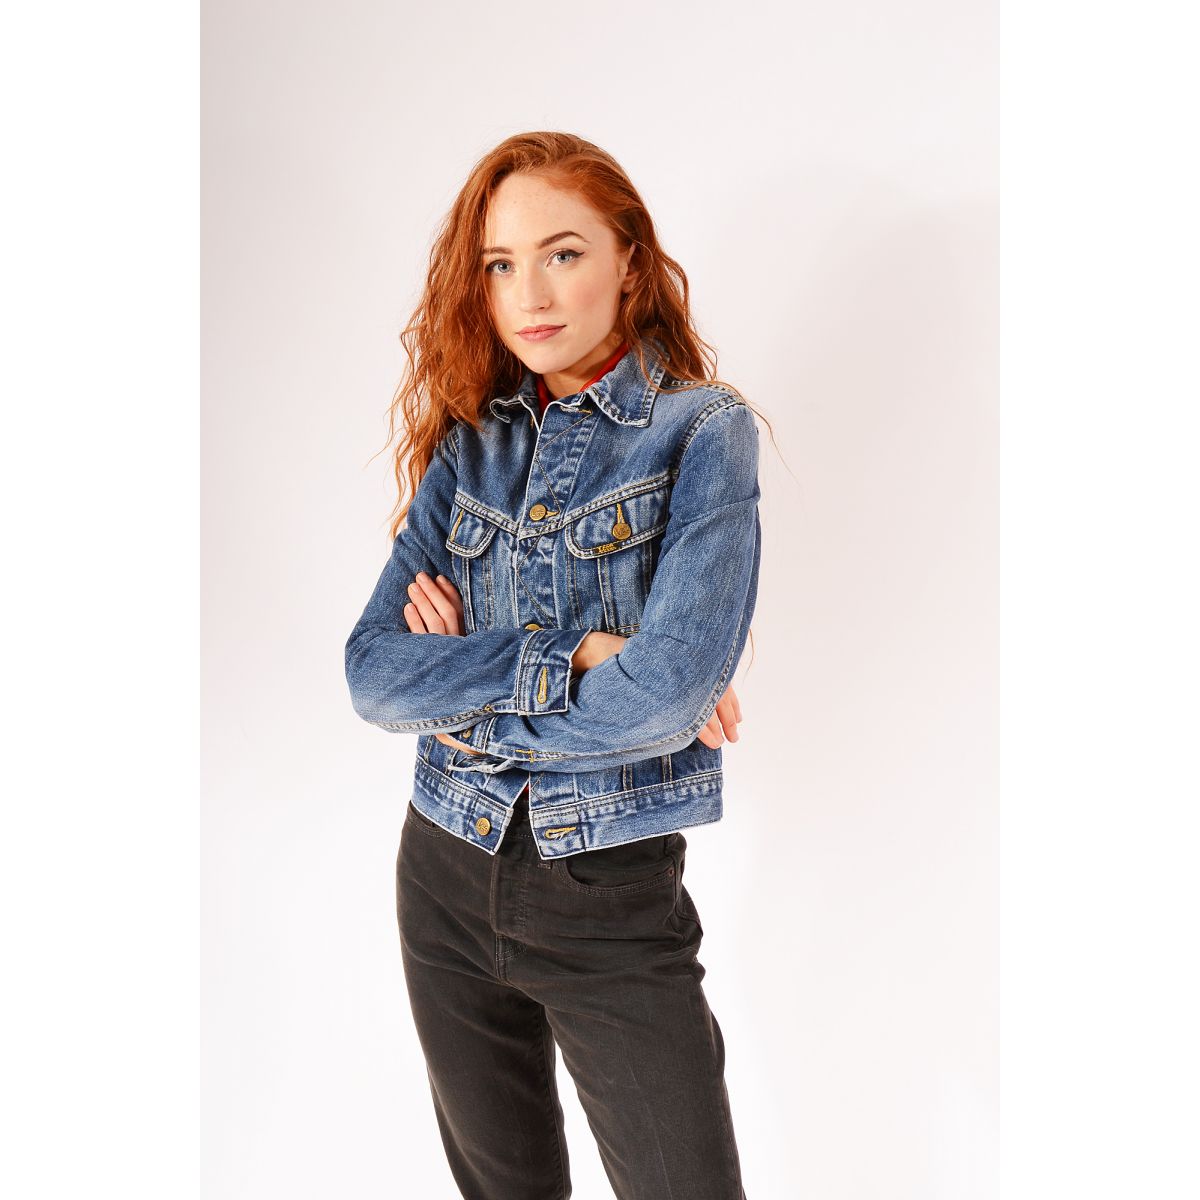 Colorful Denim Jean Jackets Plus Size 4XL, Short & Long Sleeve, Ideal For  Students, Spring/Autumn Collection From Amiery, $22.84 | DHgate.Com